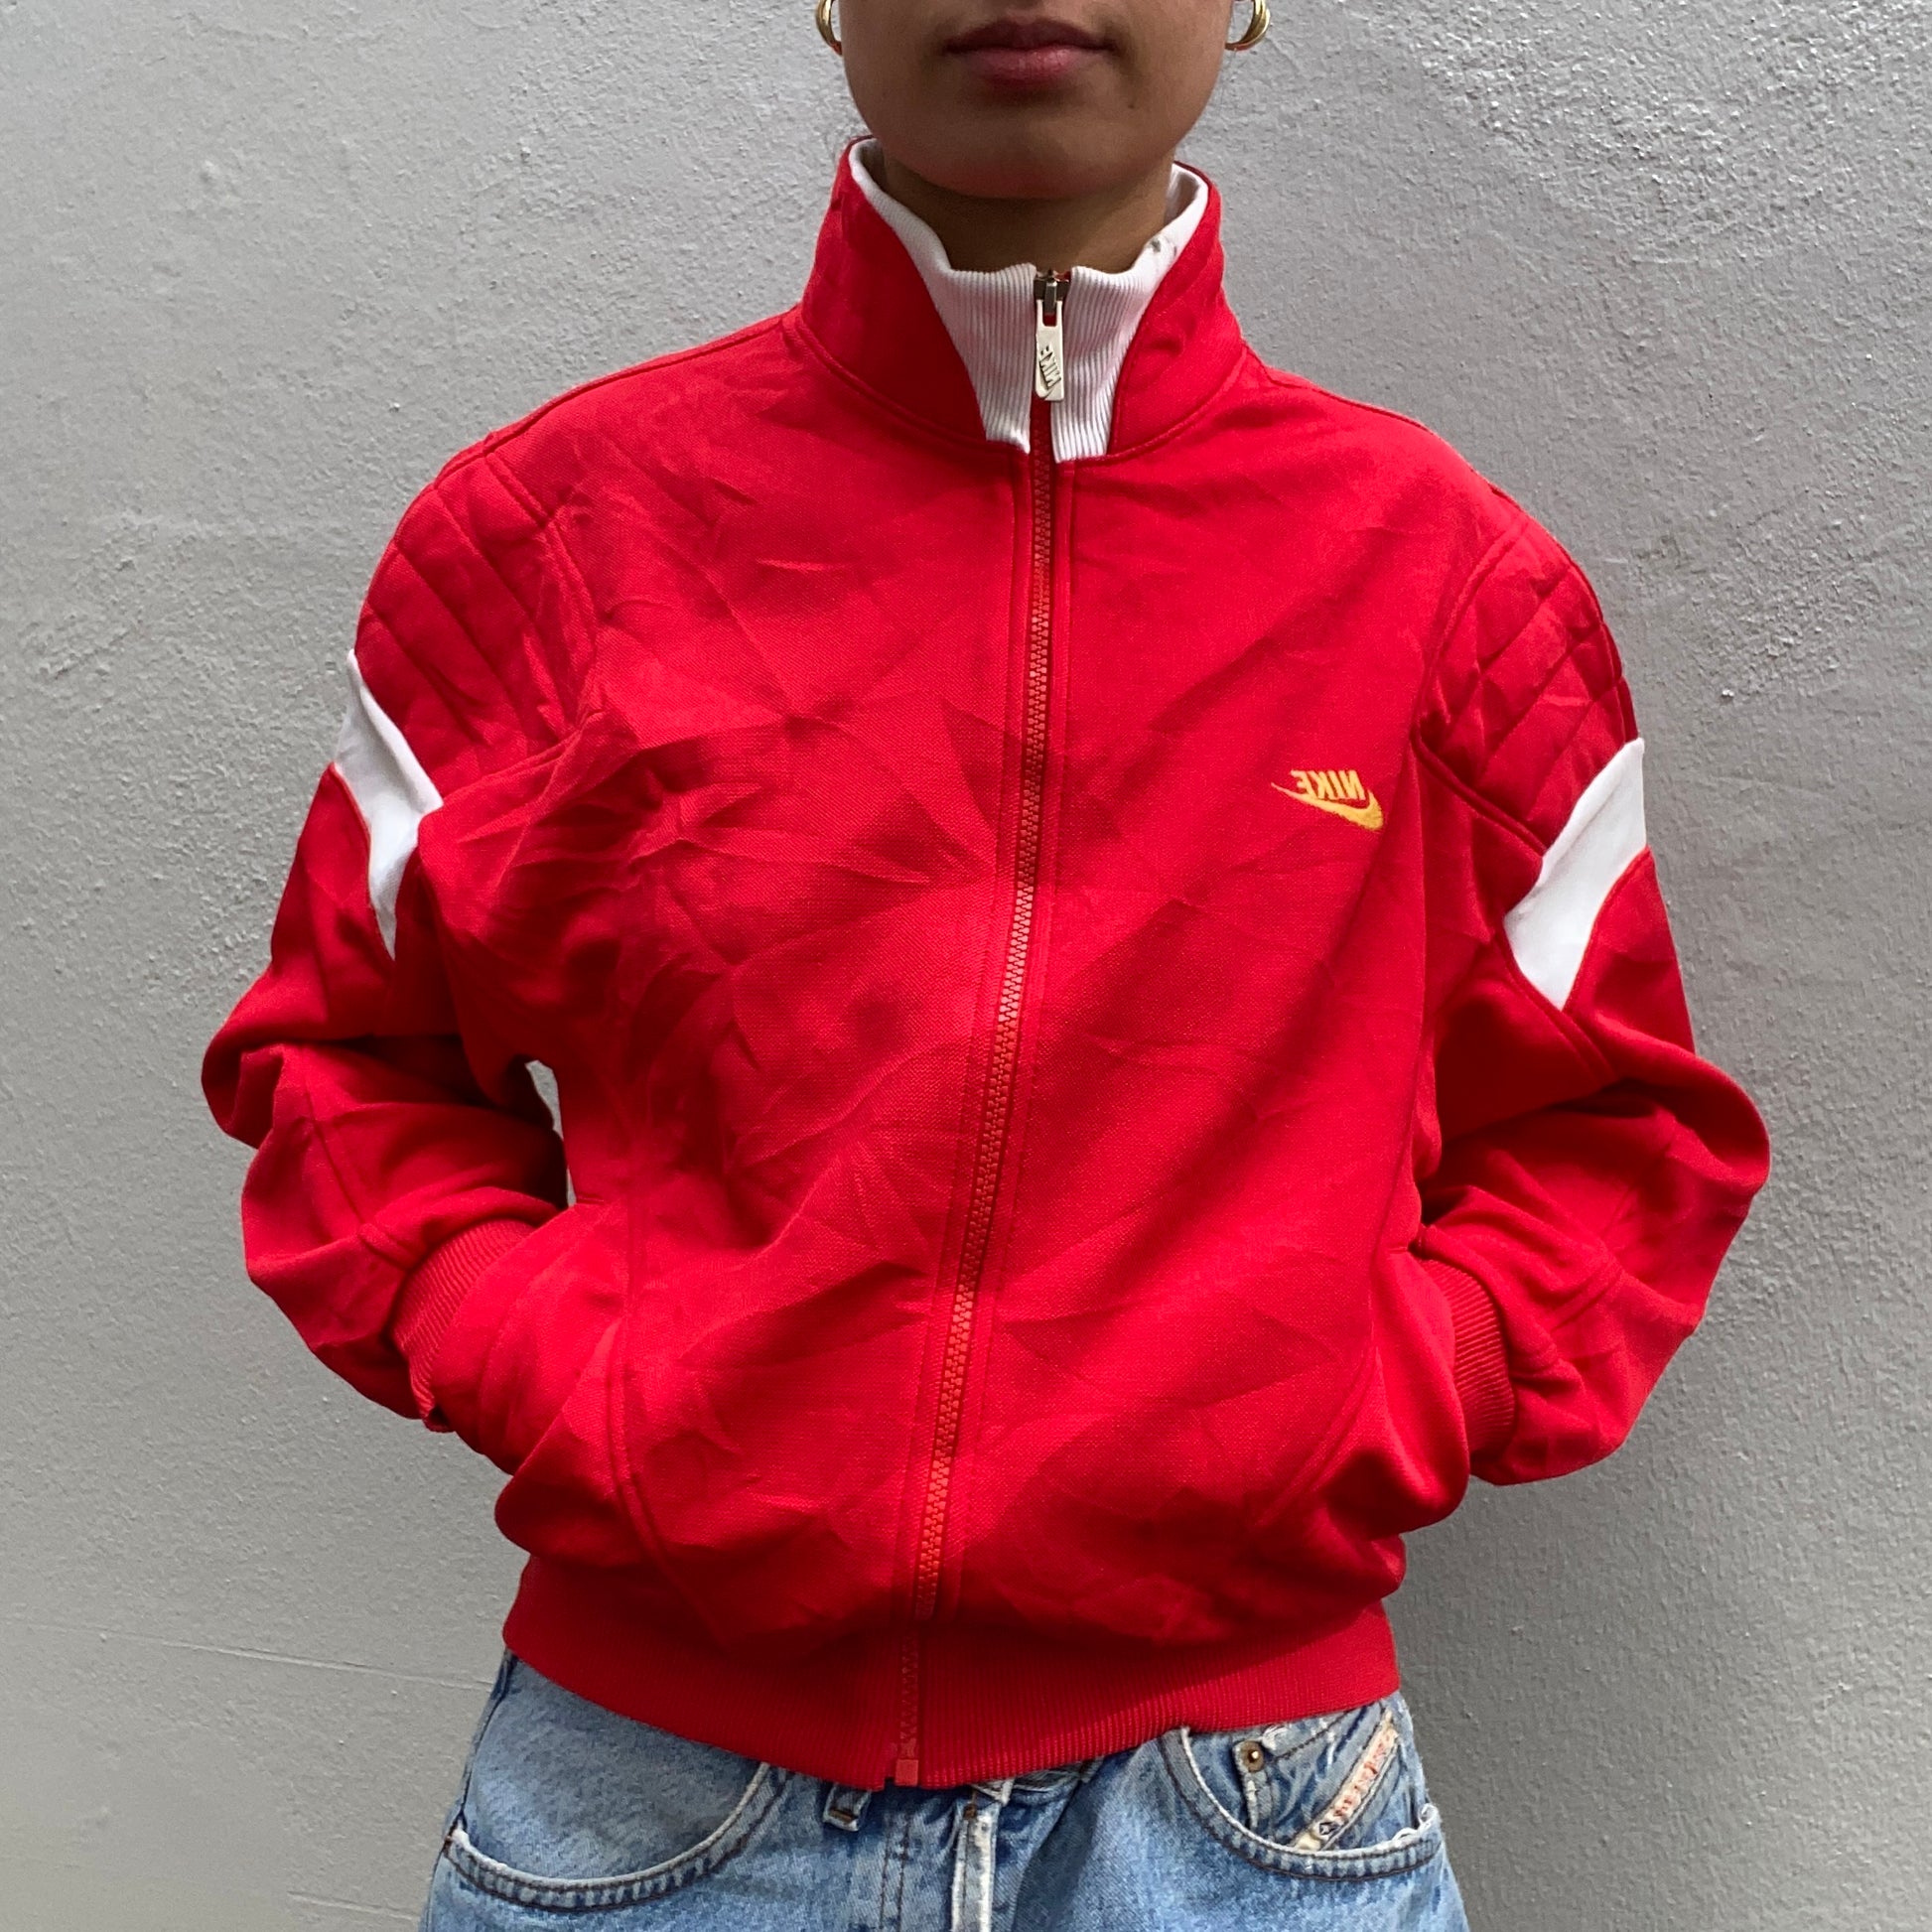 Red nike track suit 80s